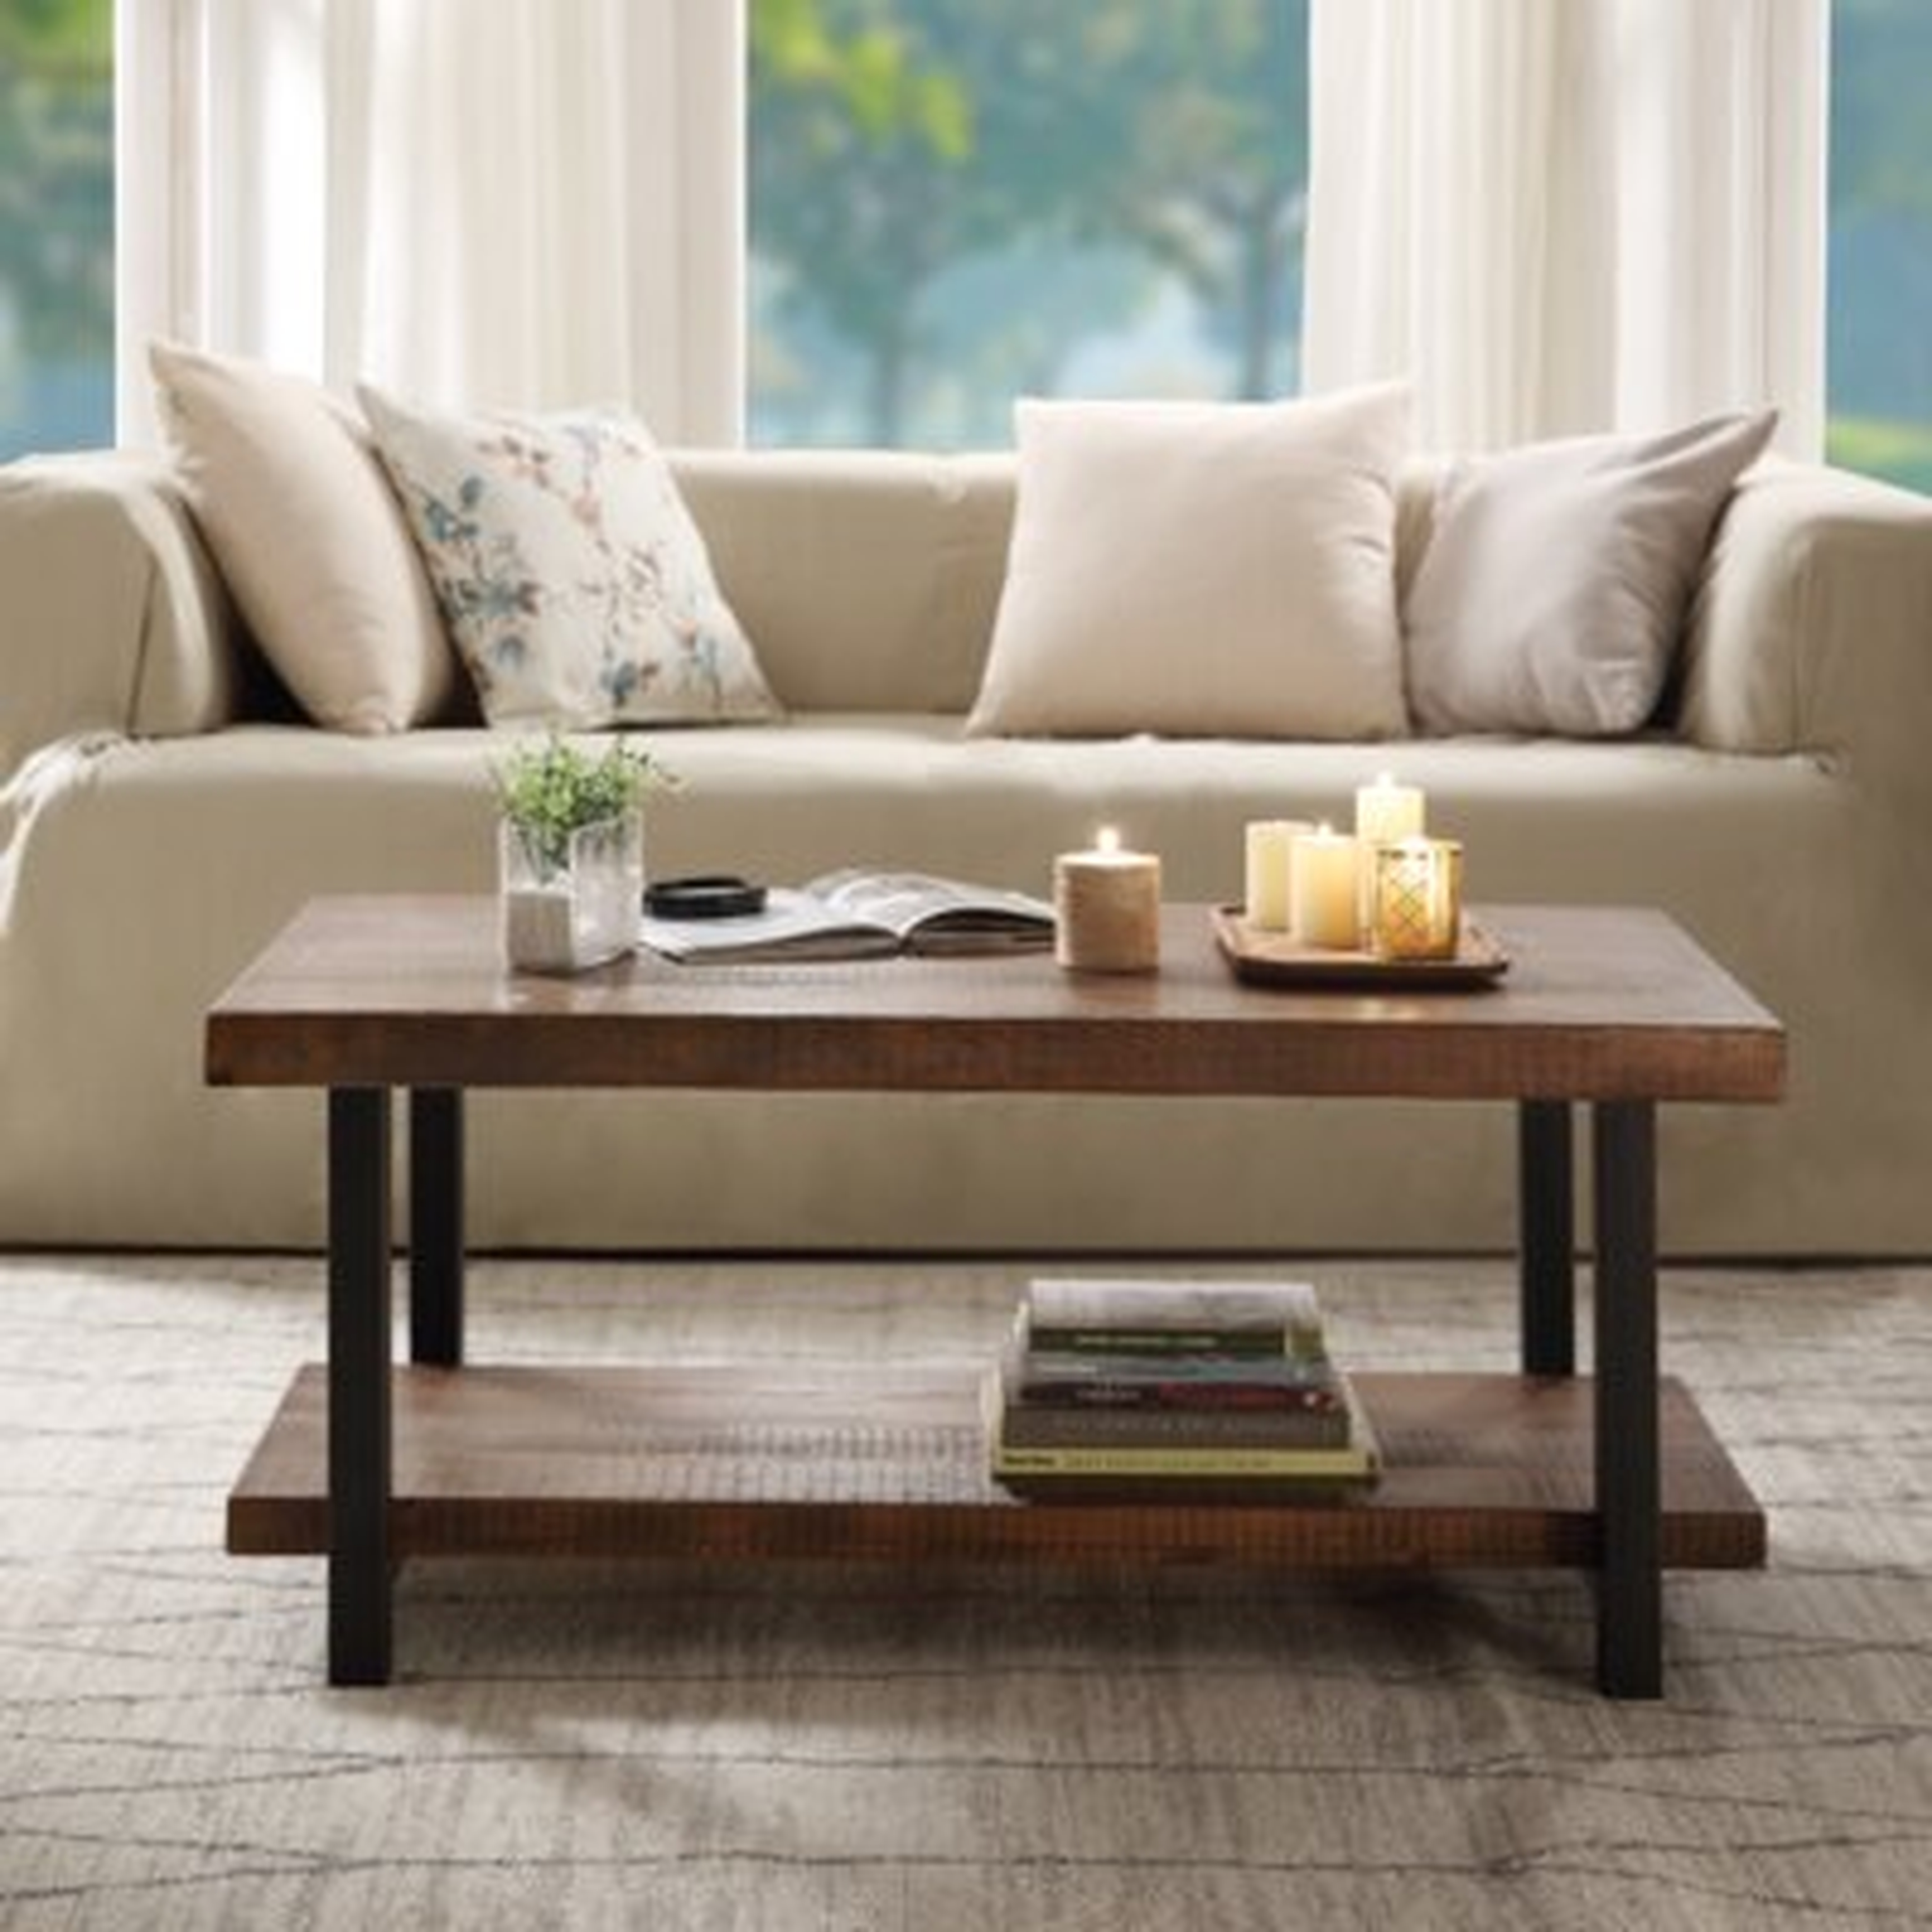 Natural Wood Idustrial Coffee Table With Open Shelf For Living Room - Wayfair